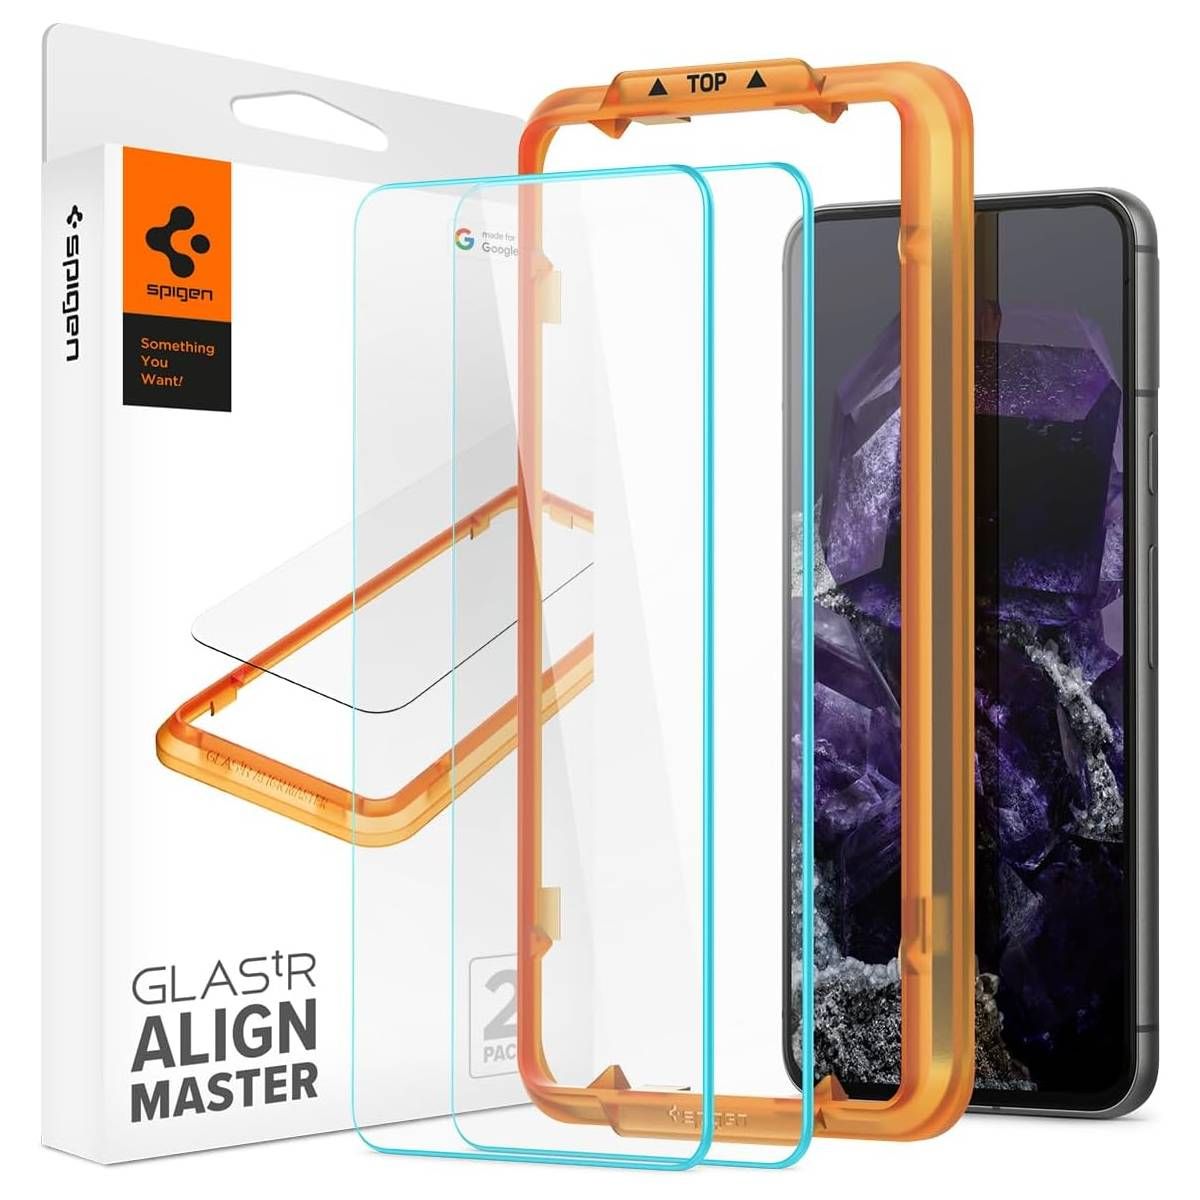 A render of Spigen's Pixel 8 screen protector, its installation frame, and its box